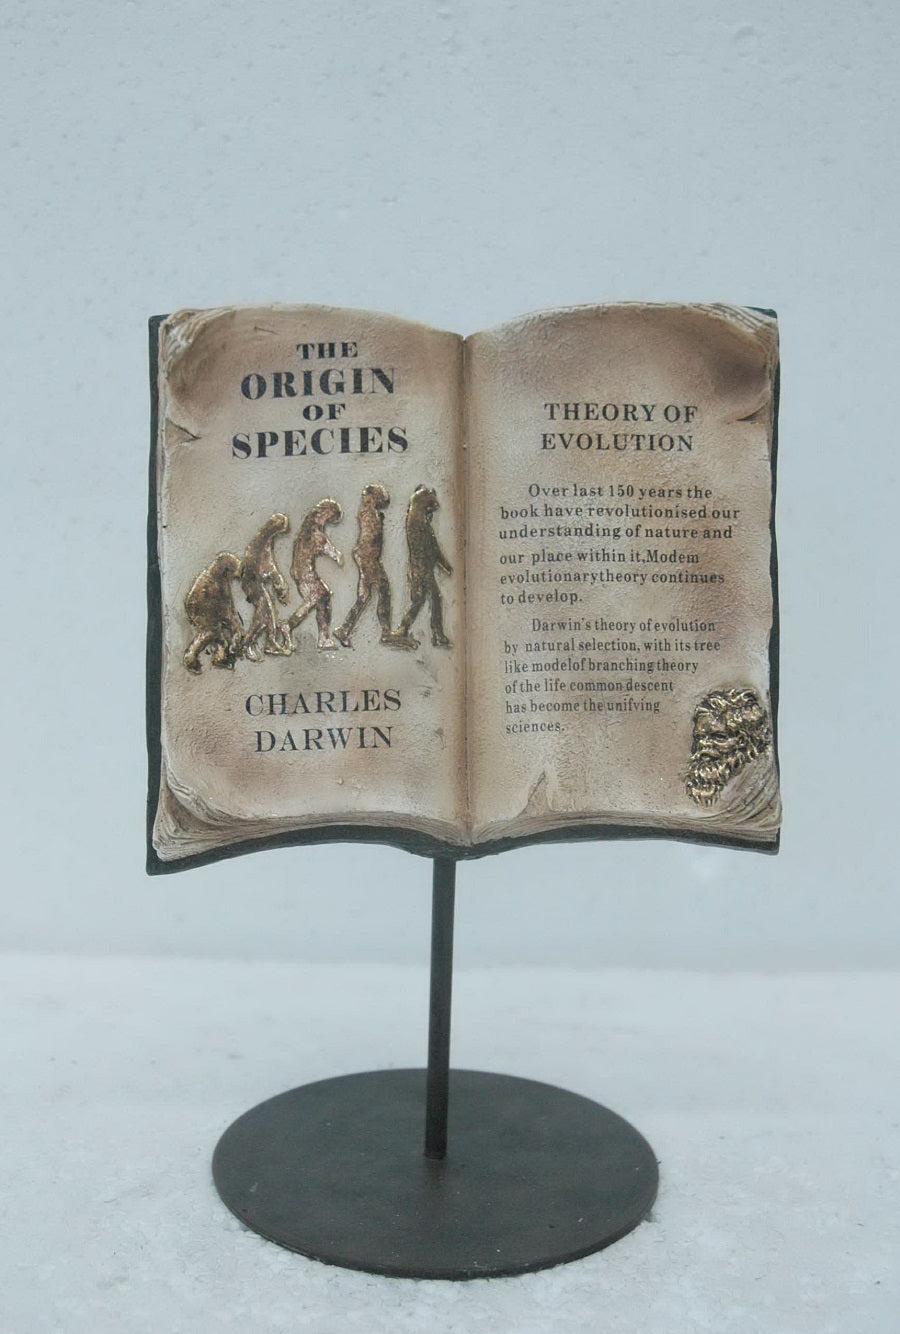 Evolution, Book on Stand Showing Evolution Theory by Charles Darwin